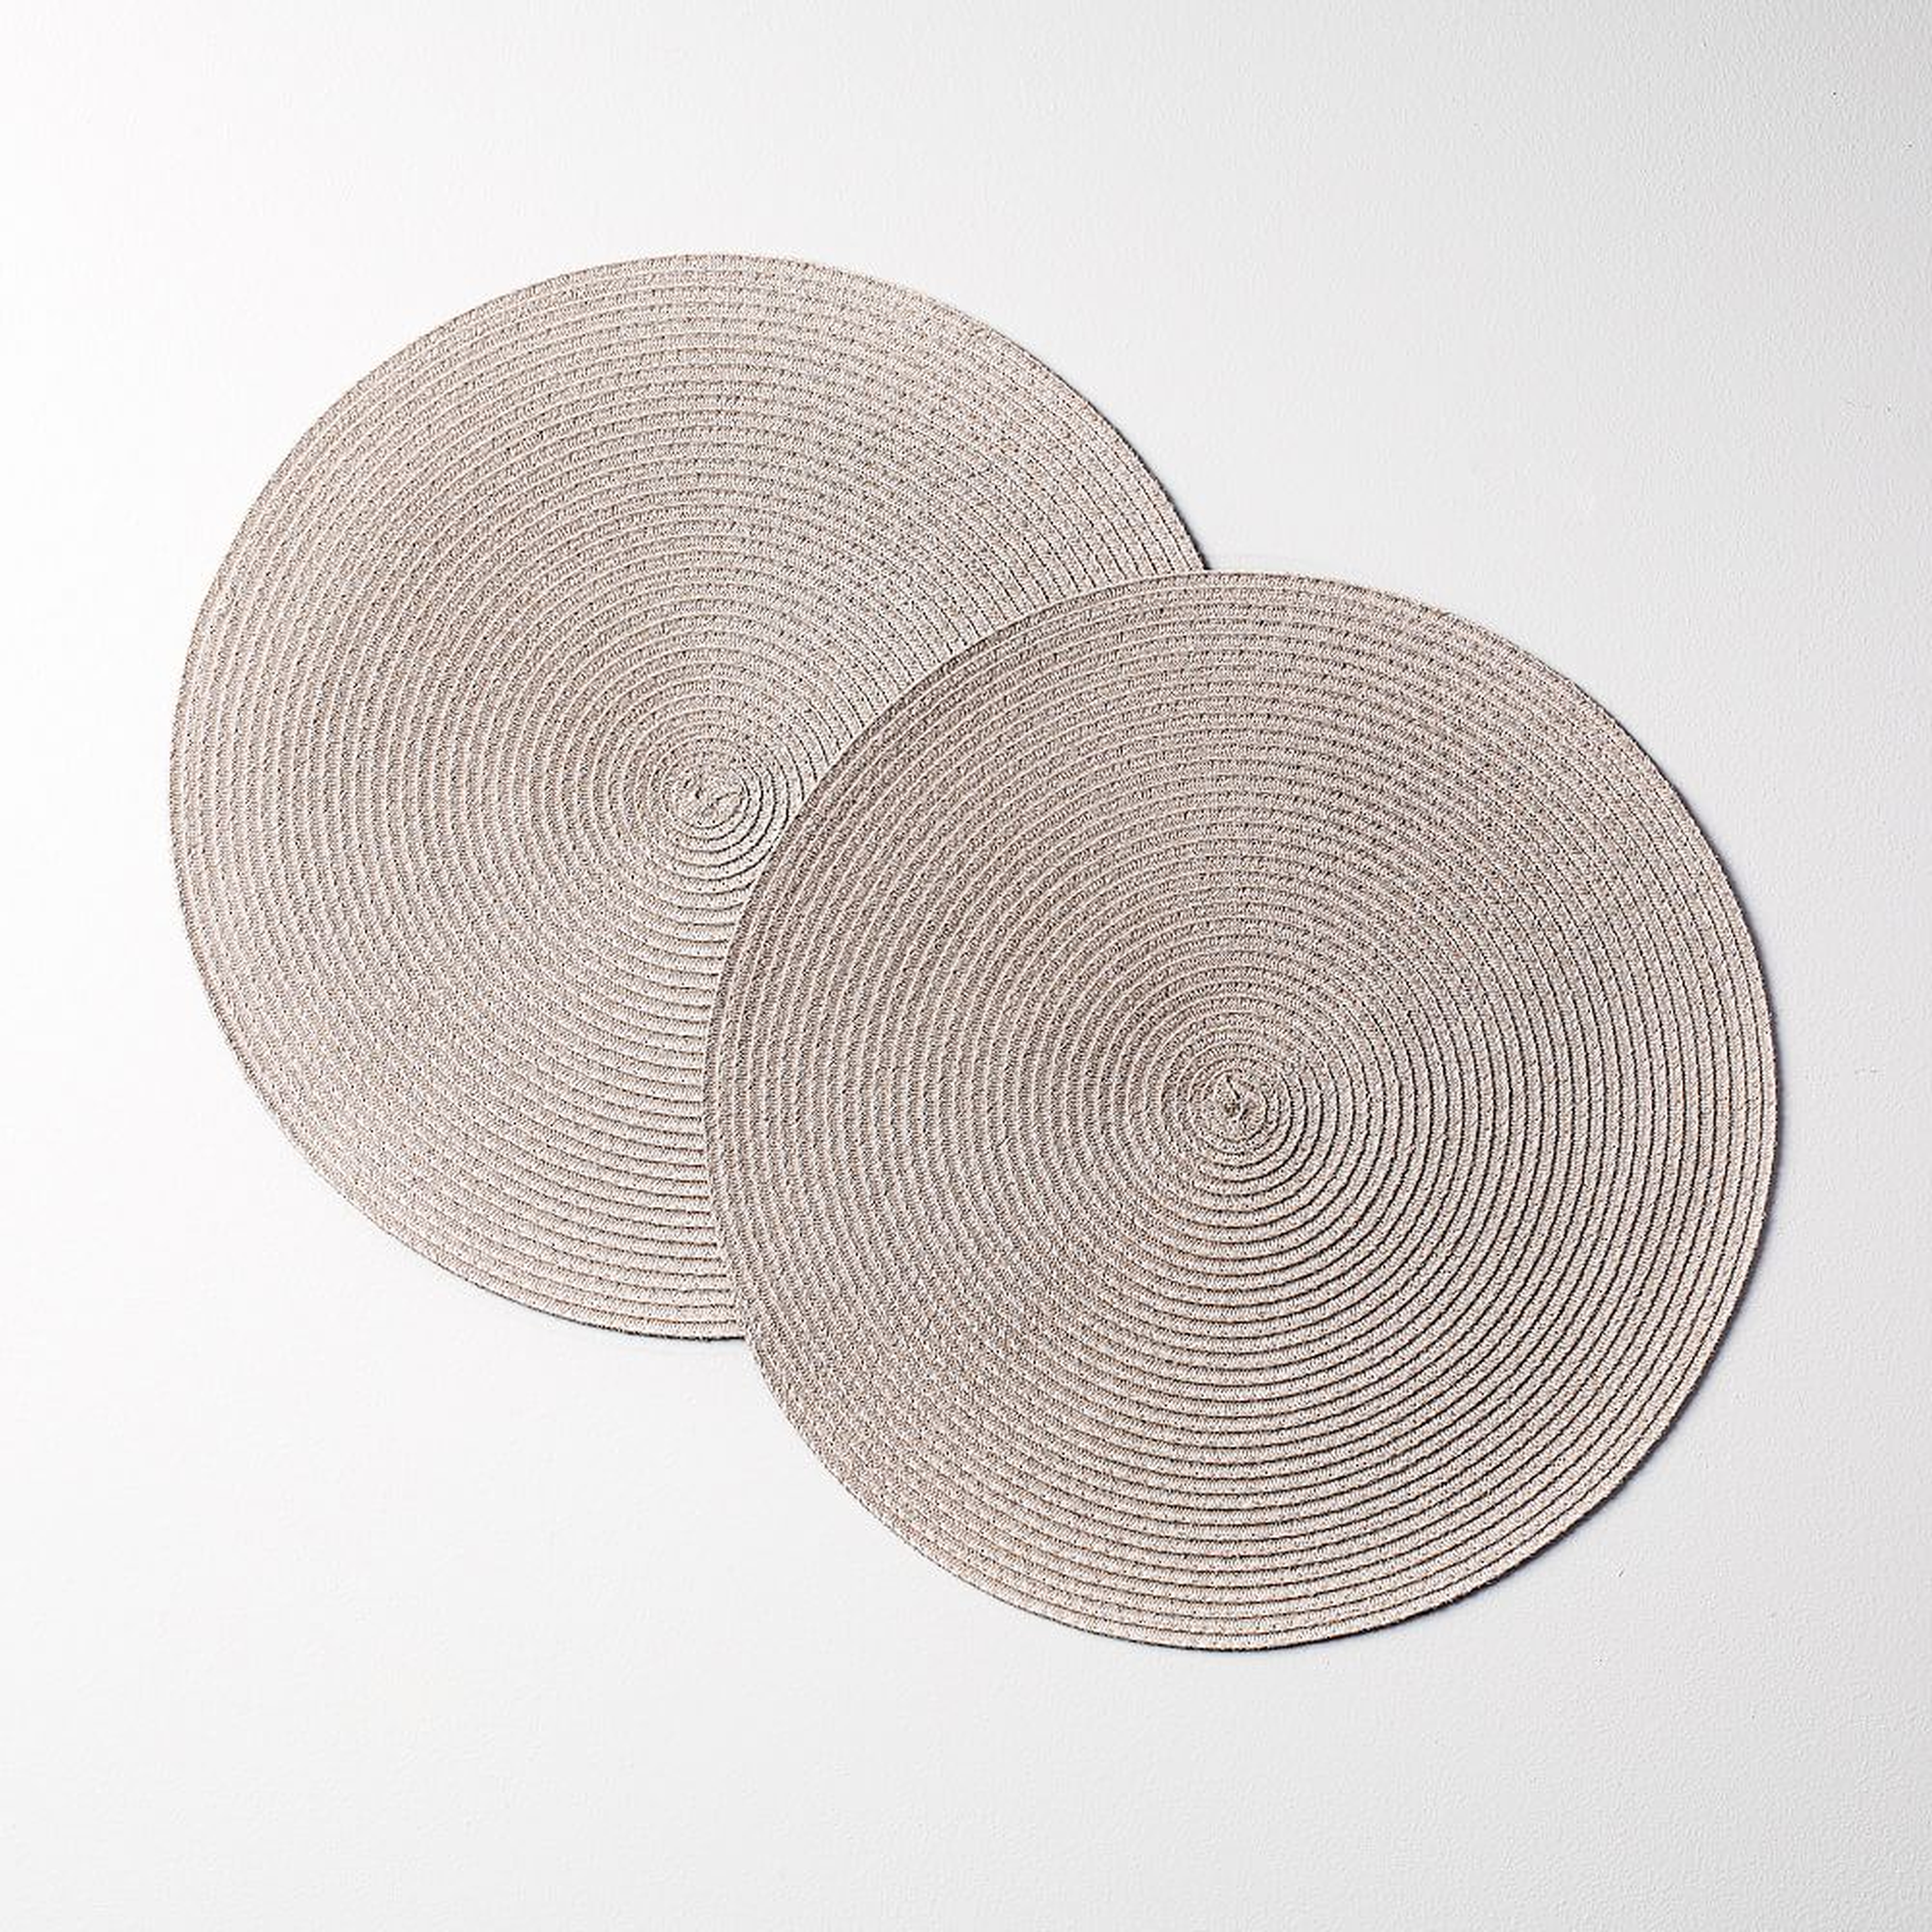 Round Woven Placemats, Metallic, Set of 2 - West Elm